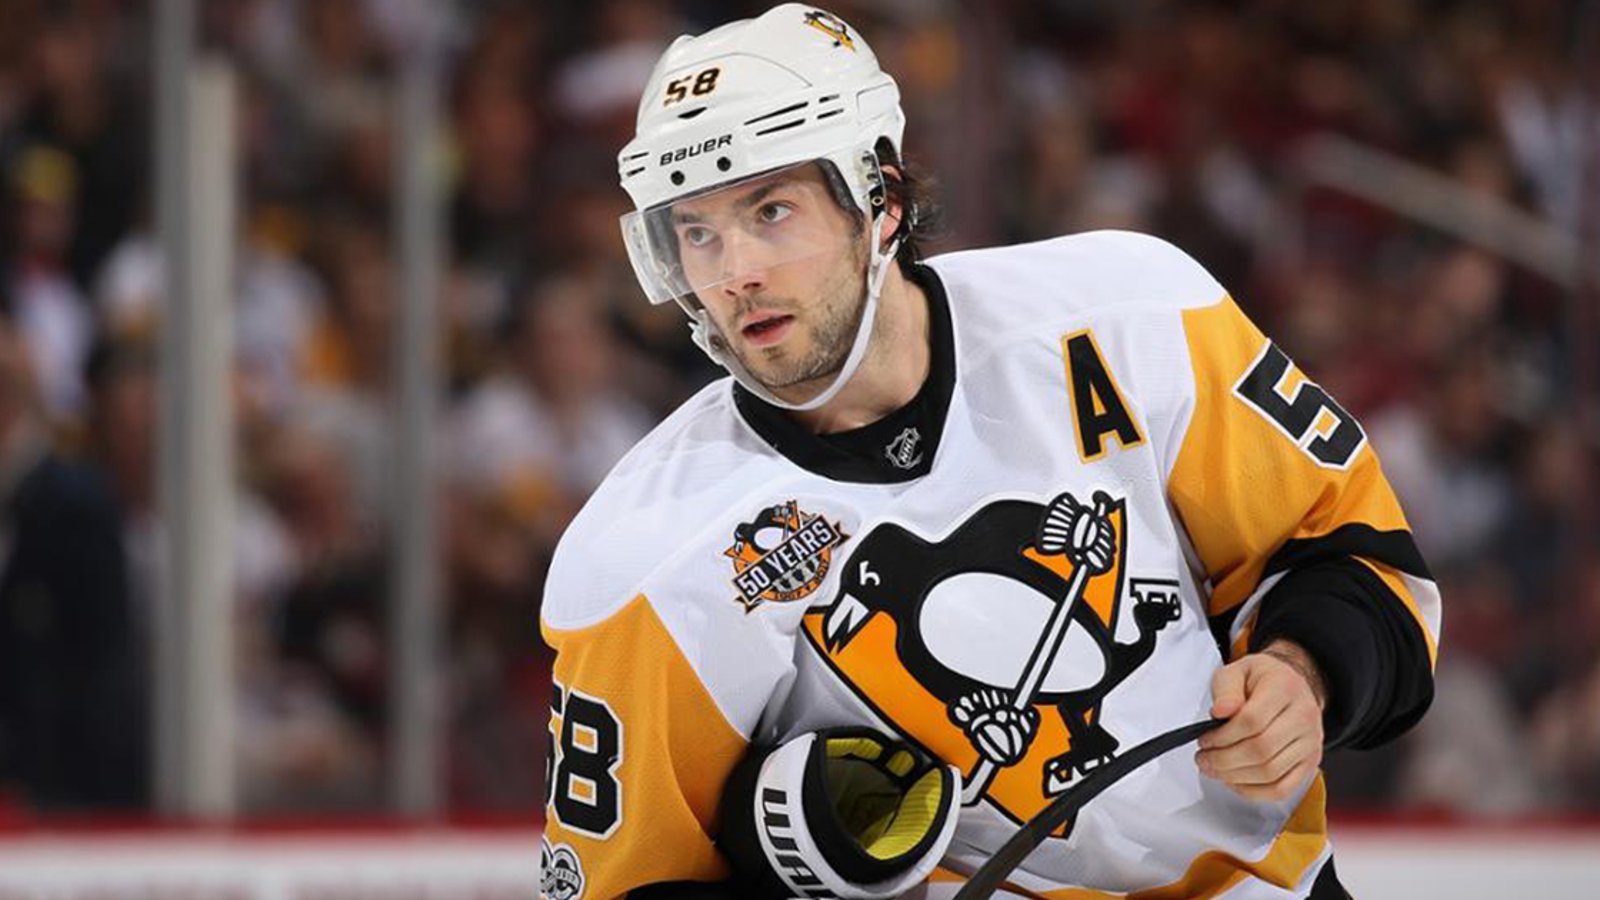 Your Call: Should the Leafs trade for Letang?